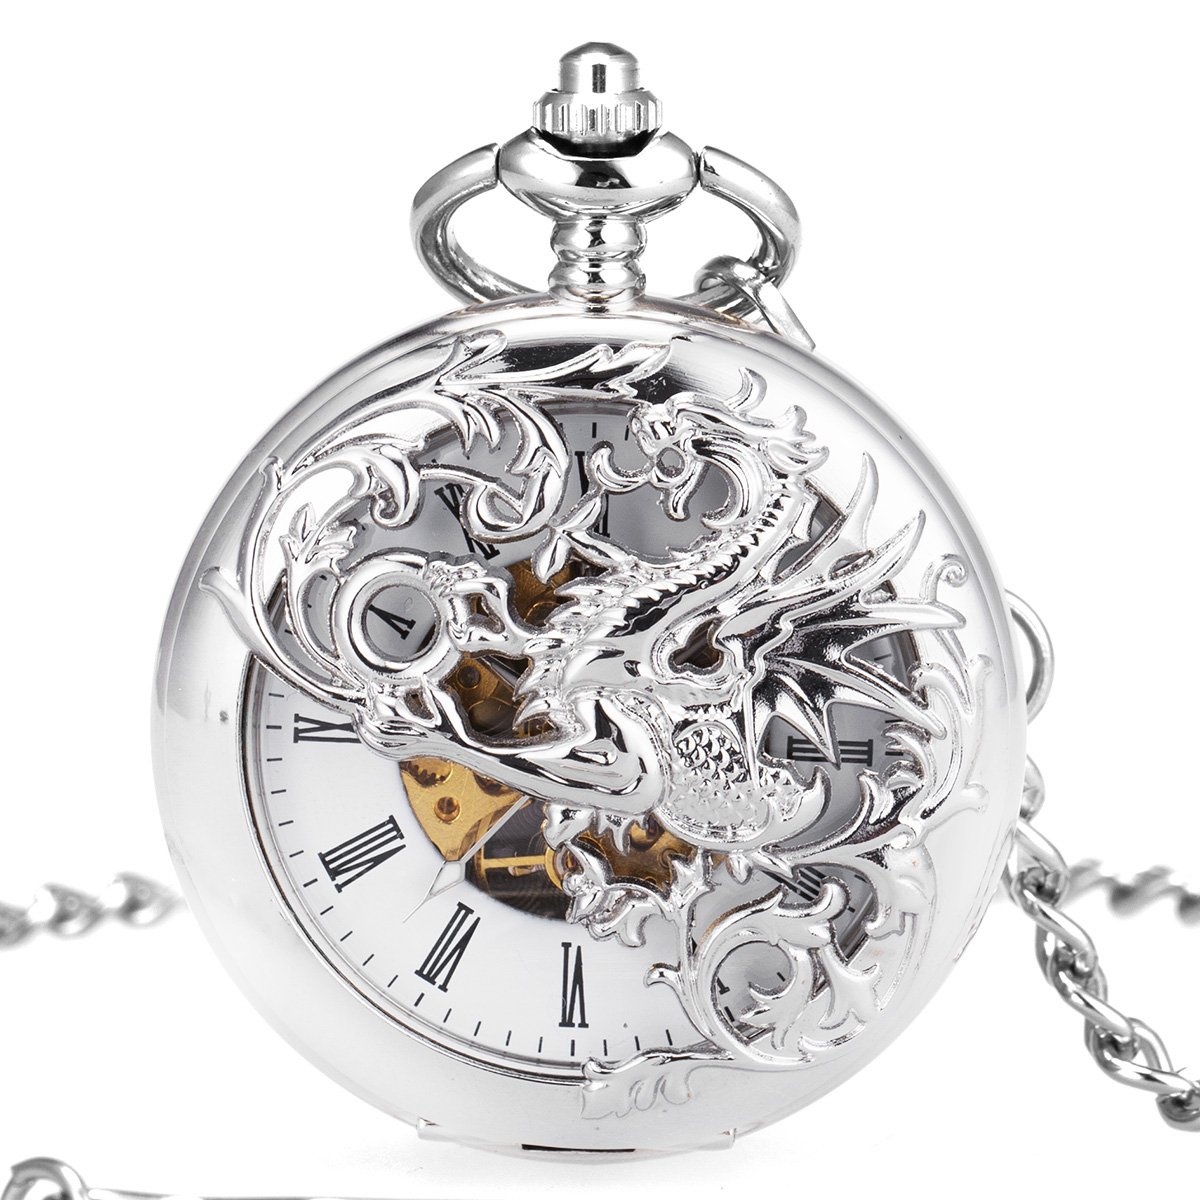 ManChDa Mens Antique Skeleton Mechanical Pocket Watch Dragon Hollow Hunter with Chain and Box